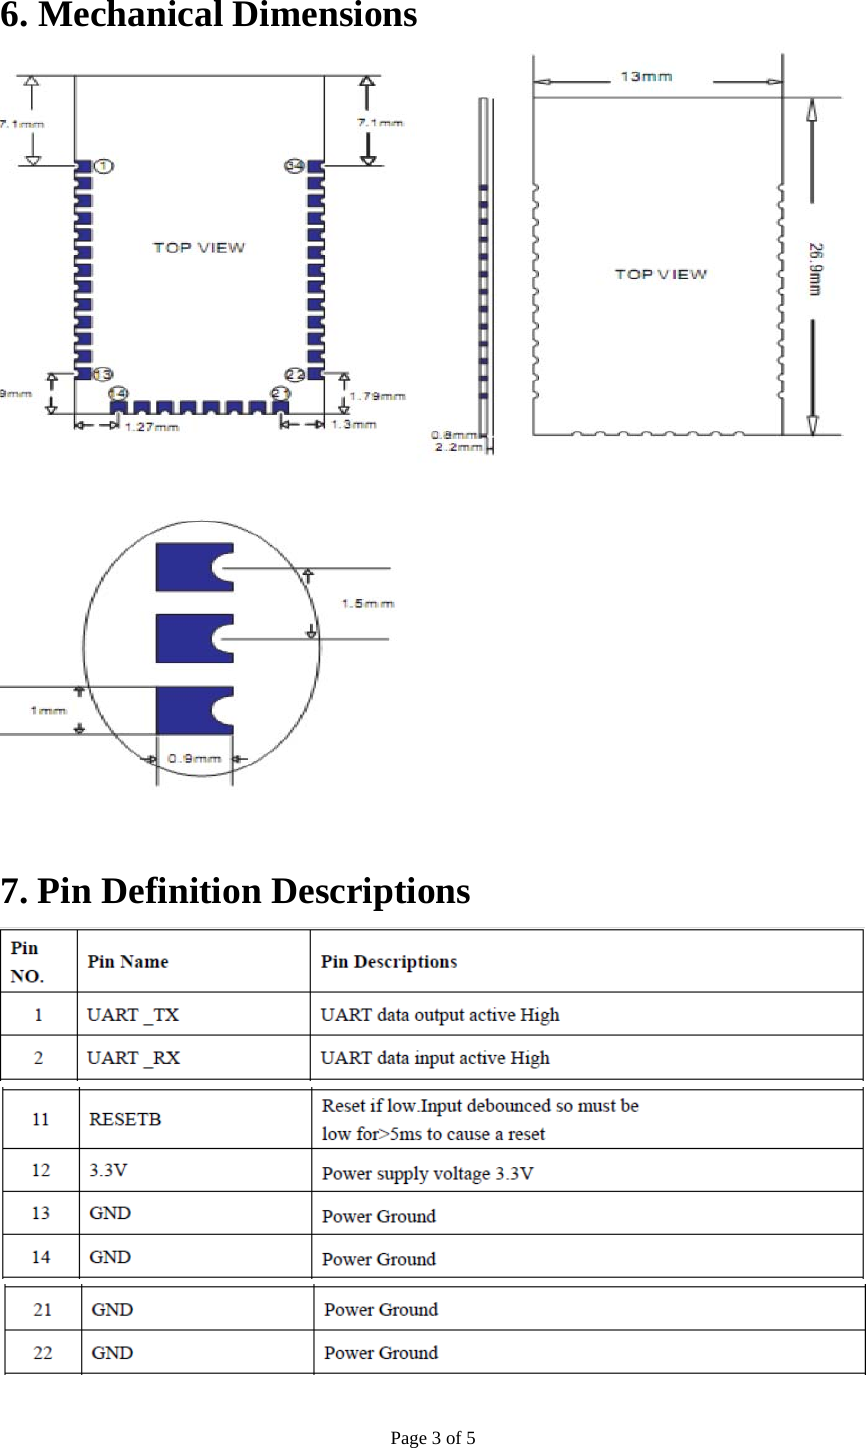 Page 3 of 5  6. Mechanical Dimensions   7. Pin Definition Descriptions    